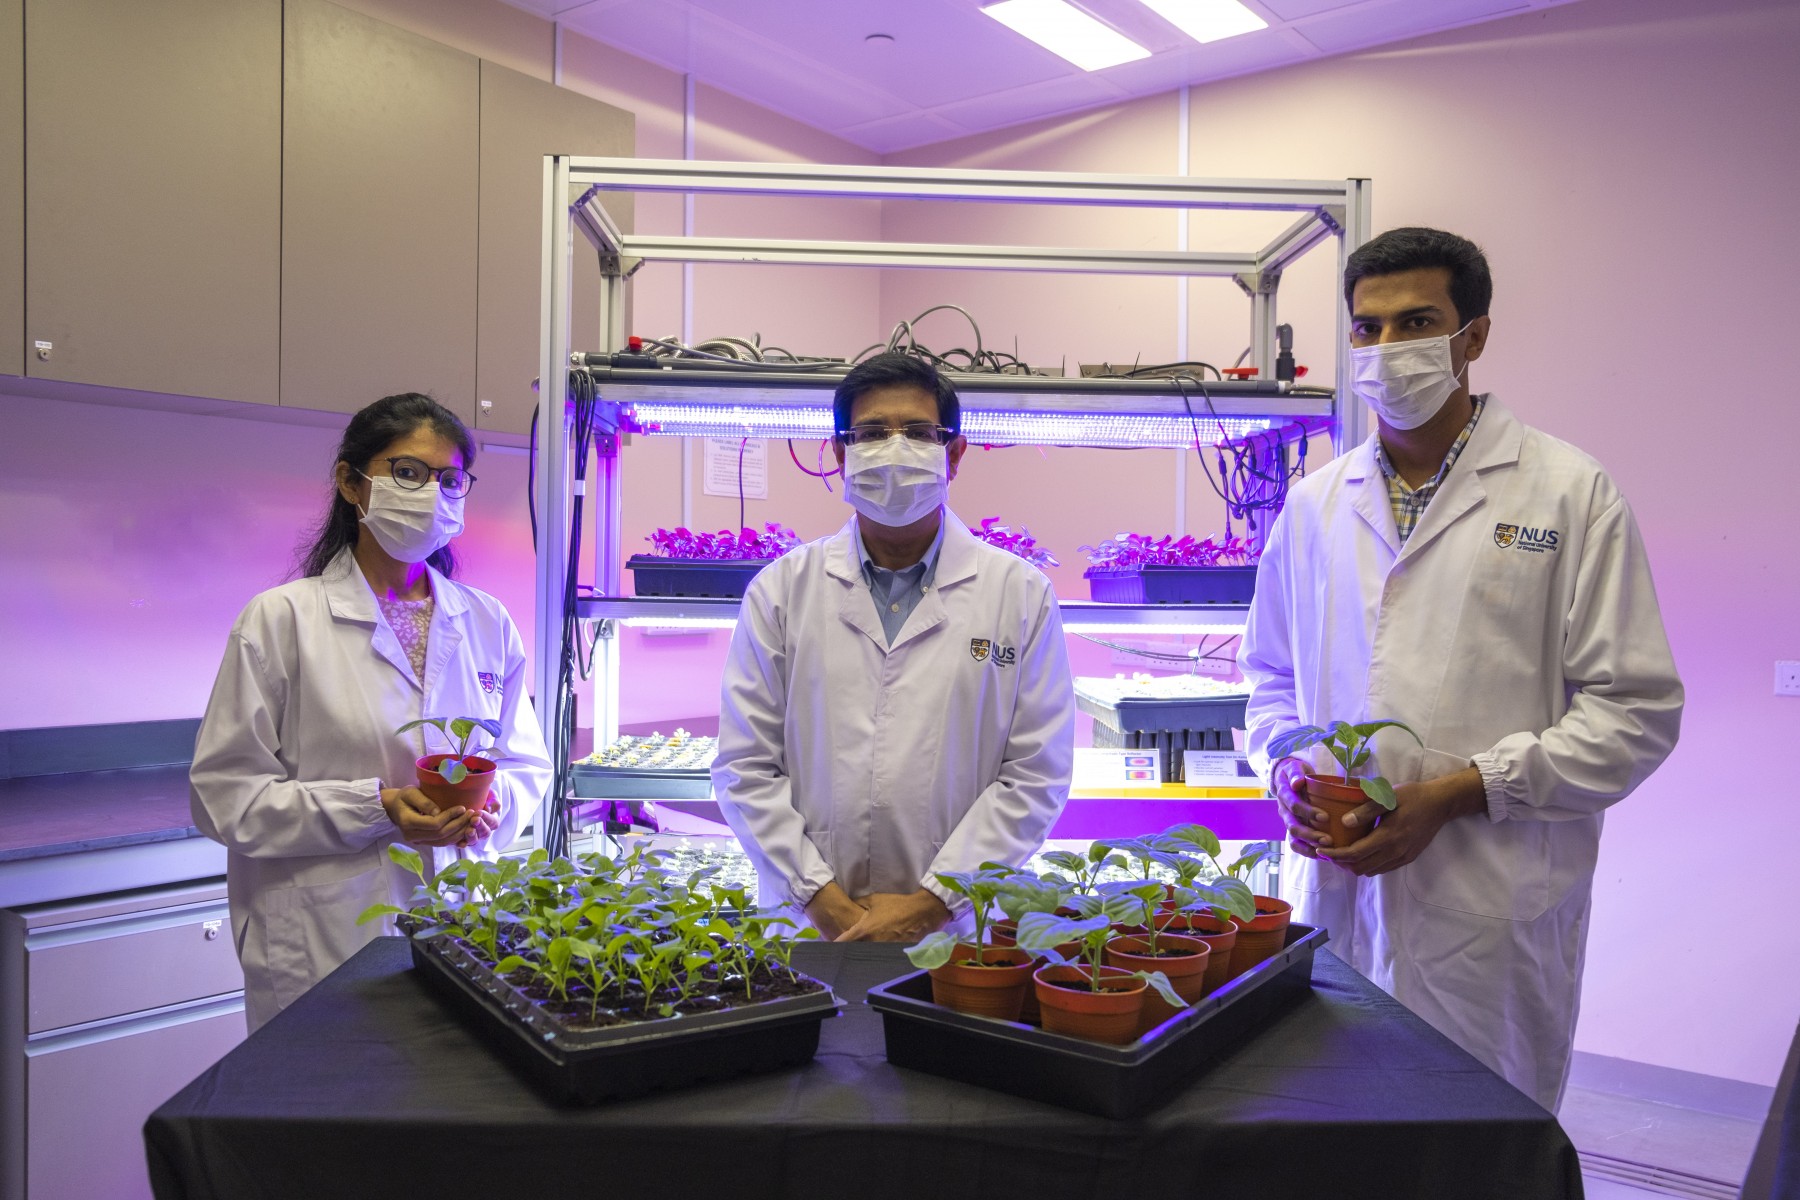 NUS researchers identify micro-organisms that could help vegetables grow better